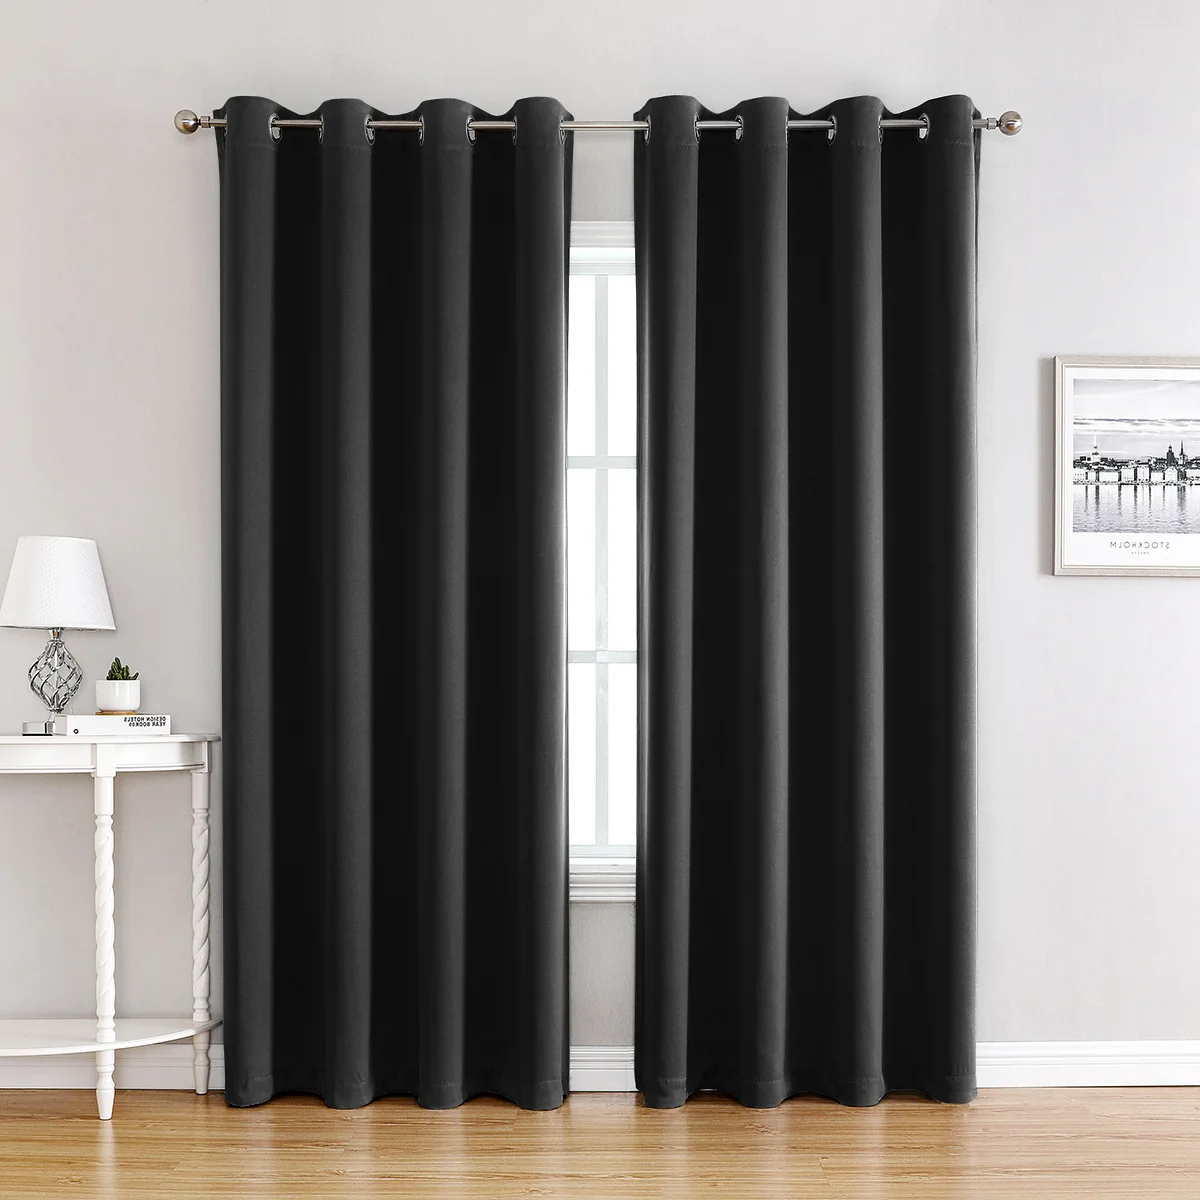 

1 Panel Moder Curtains For Livingroom High Shaing Curtain90% For Blackout Bedroom Curtain Thick Blinds Drapes Door